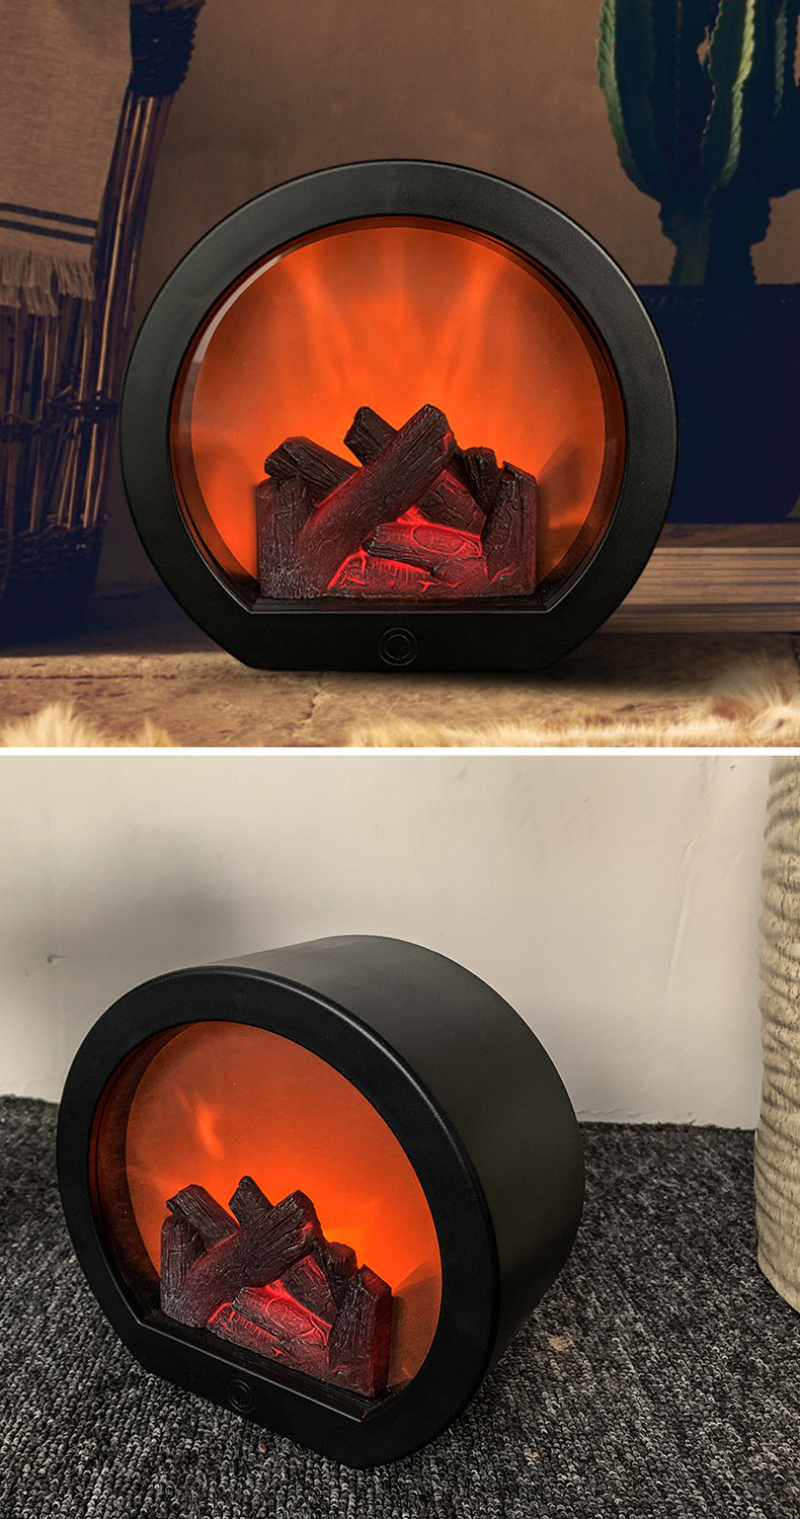 USBBattery-Powered-Creative-Fireplace-Flame-Lamp-Nordic-Style-Flame-Effect-Portable-LED-Simulation-F-1795172-5